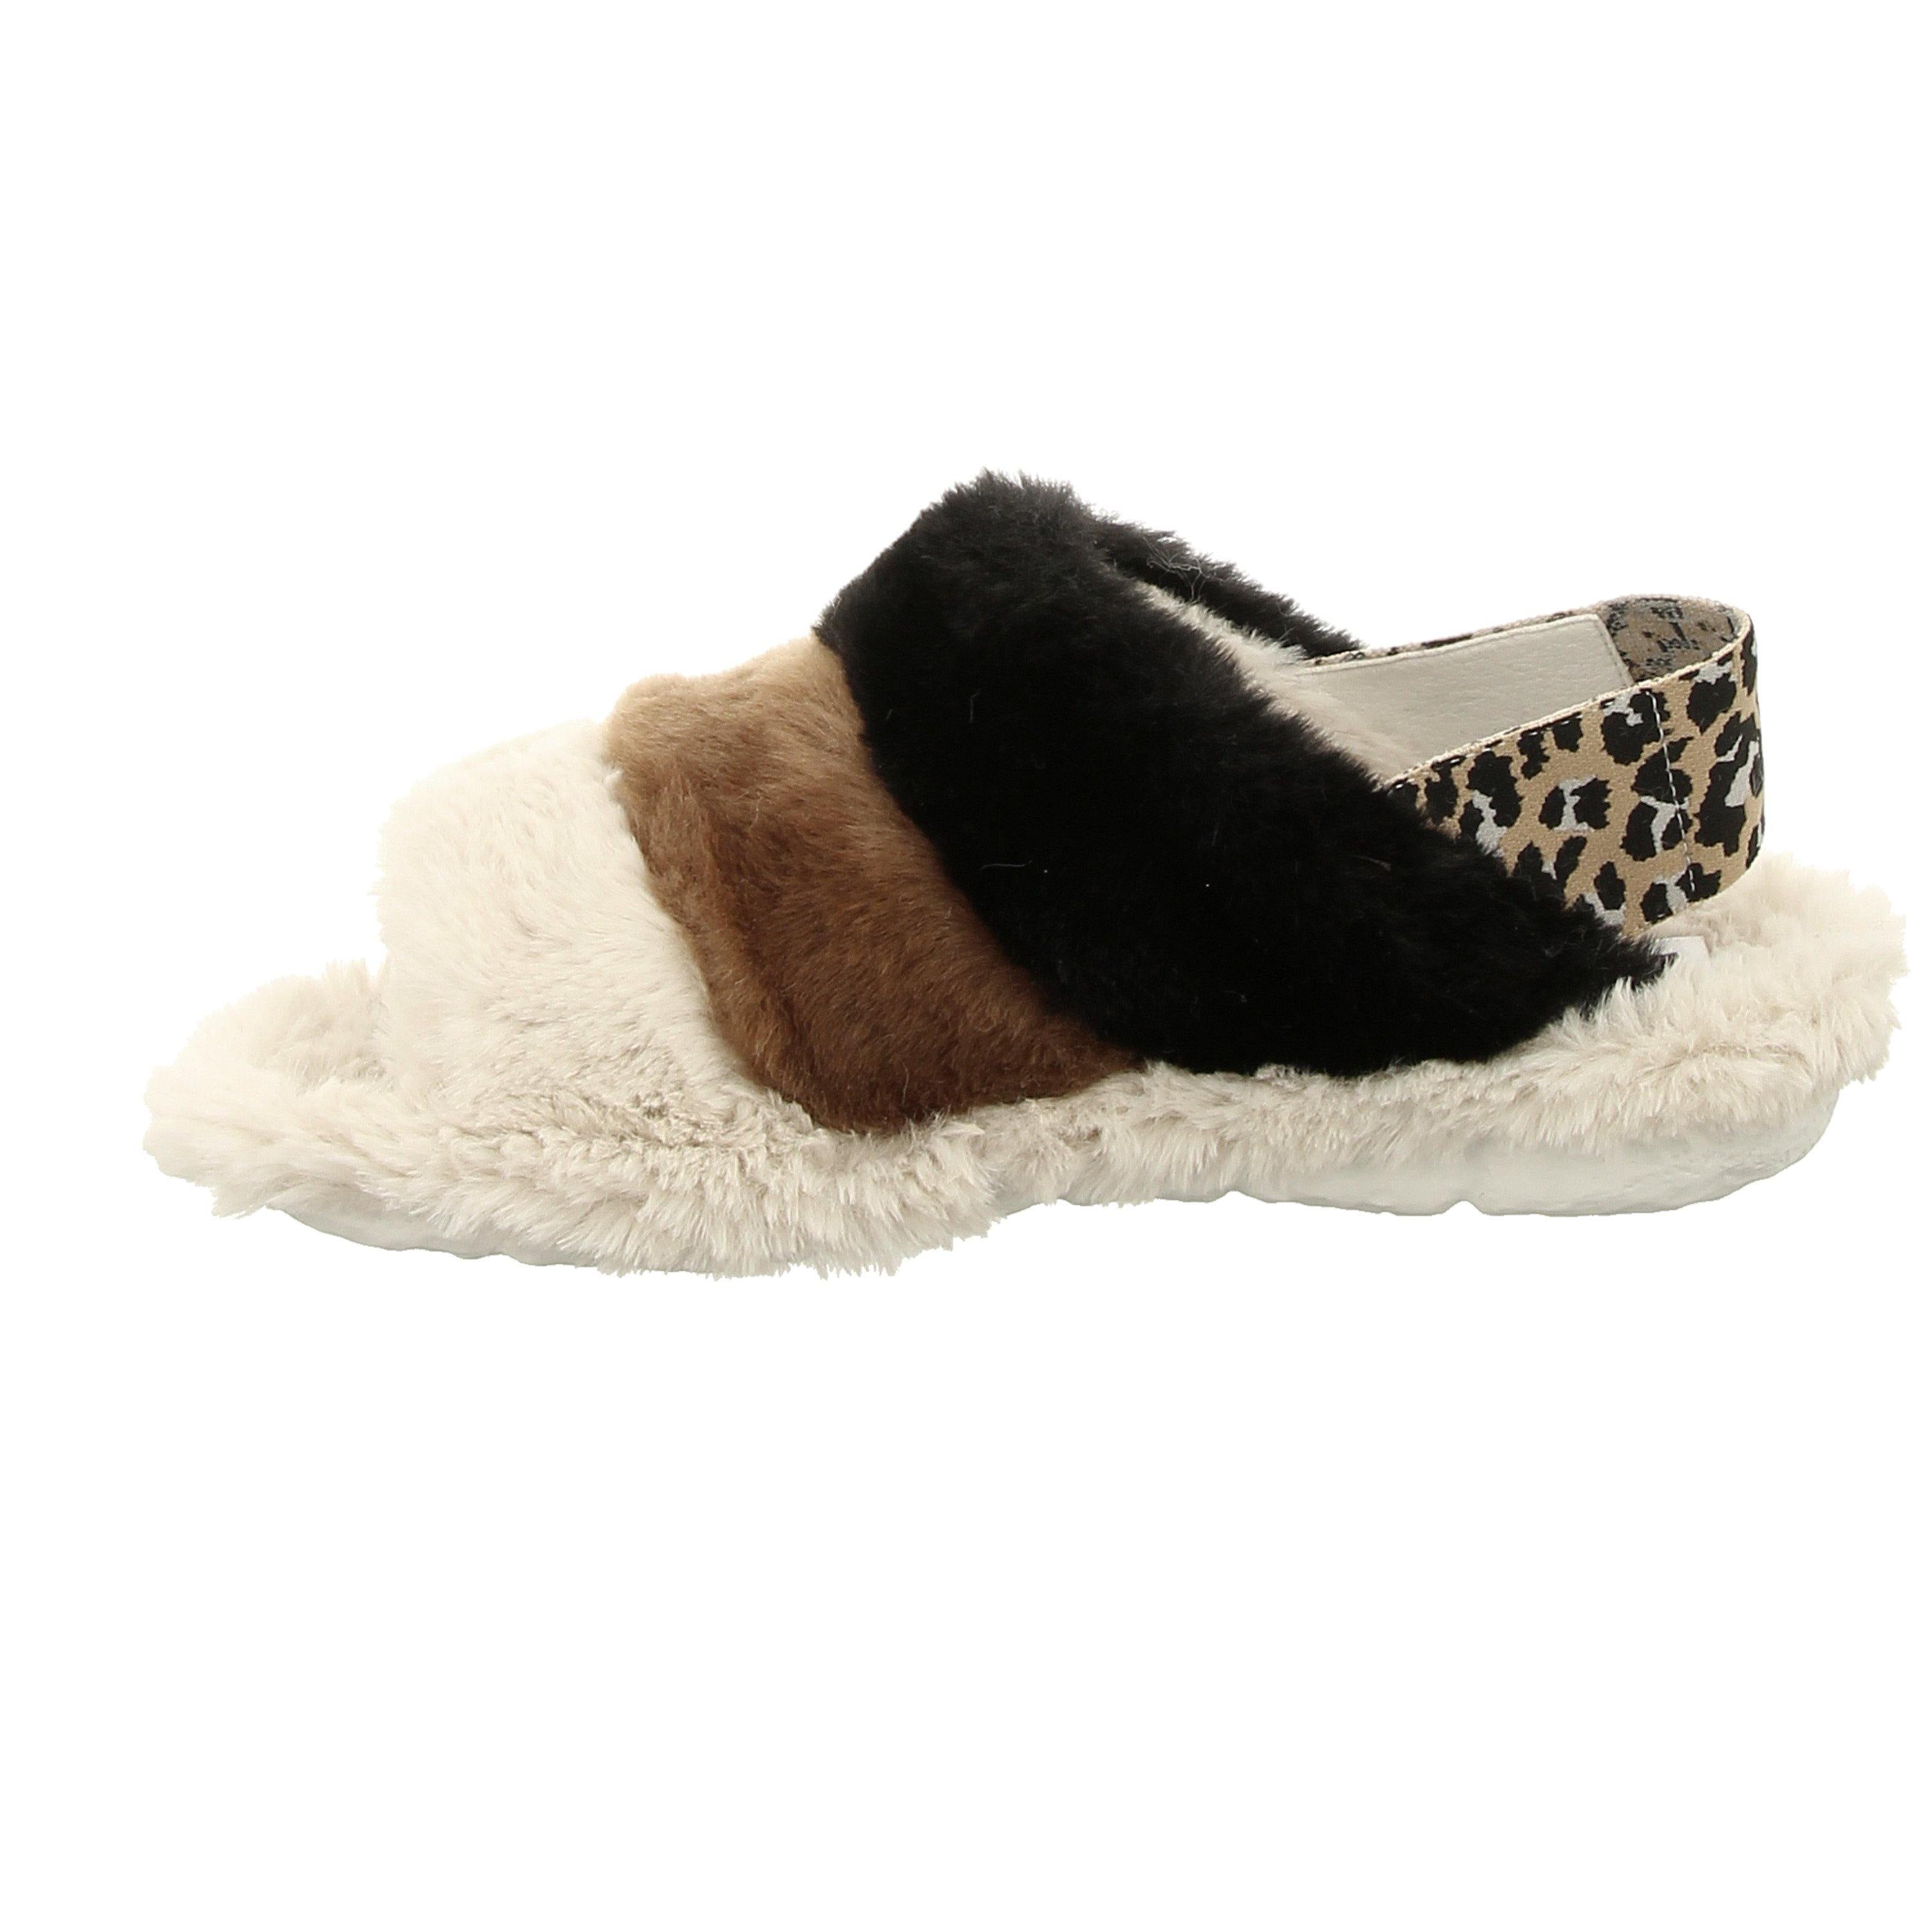 Slipper style LILLE 104 by Romika USA